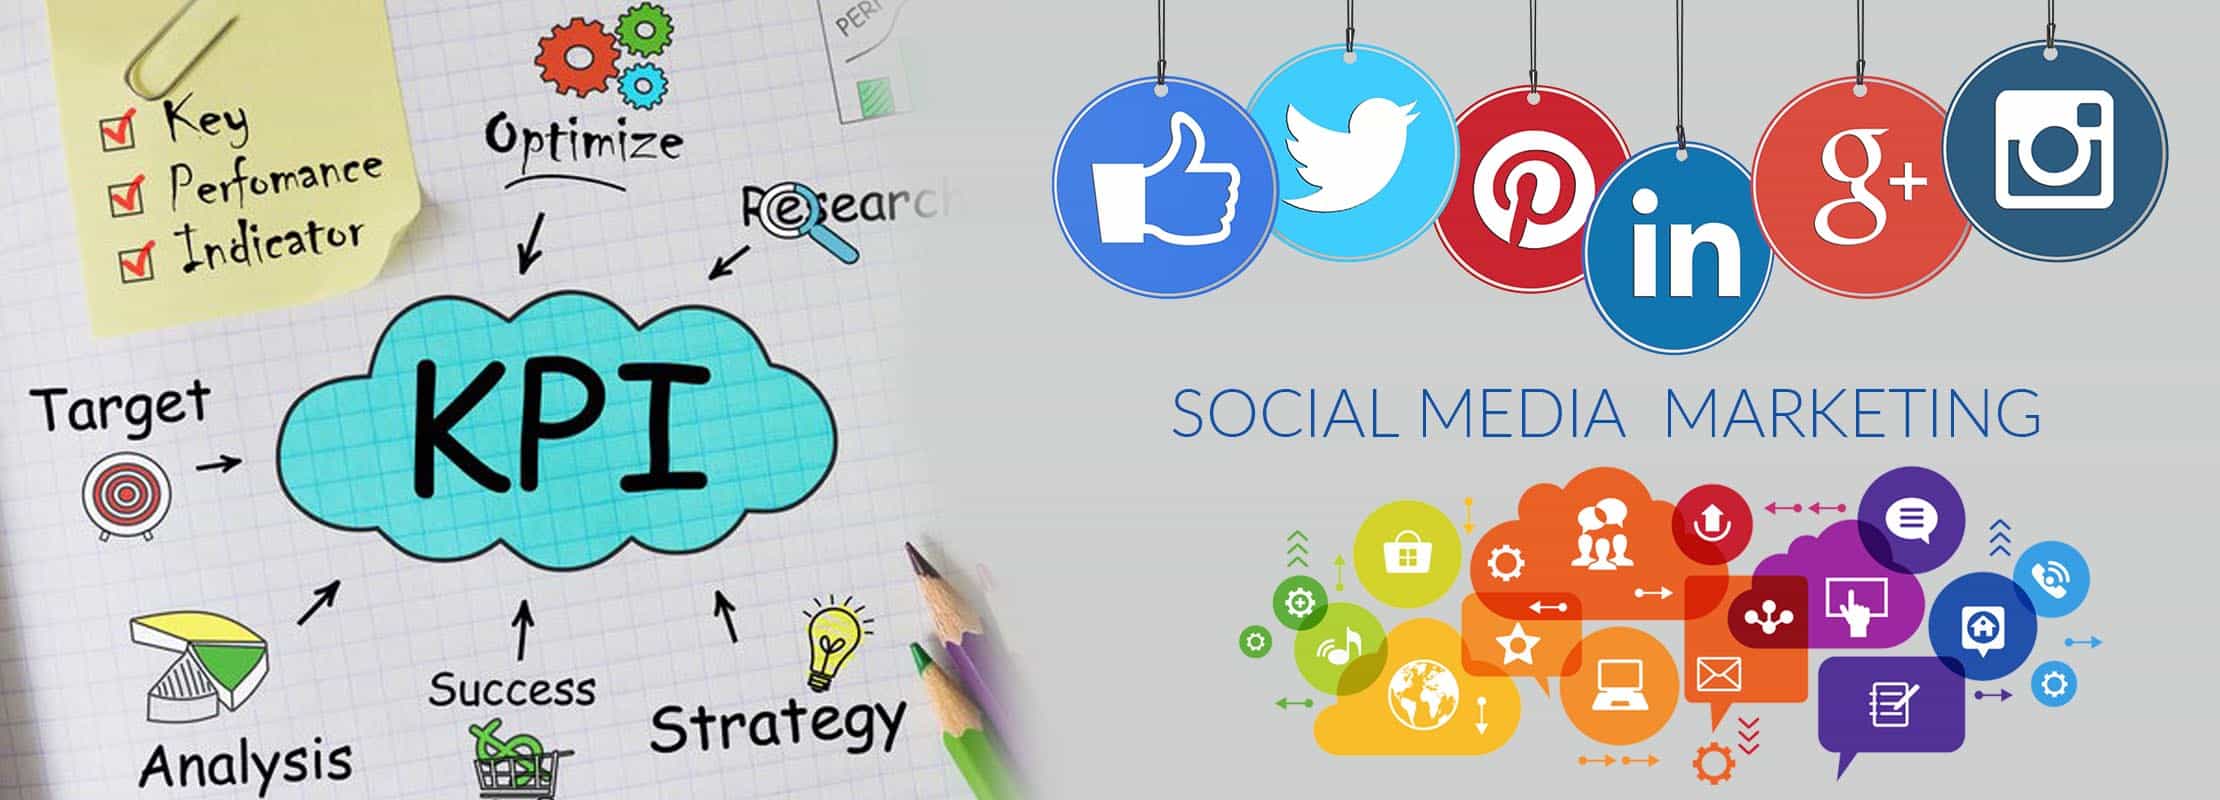 different social media icons|things pointed to KPI|social media marketing as header|web design company in kerala